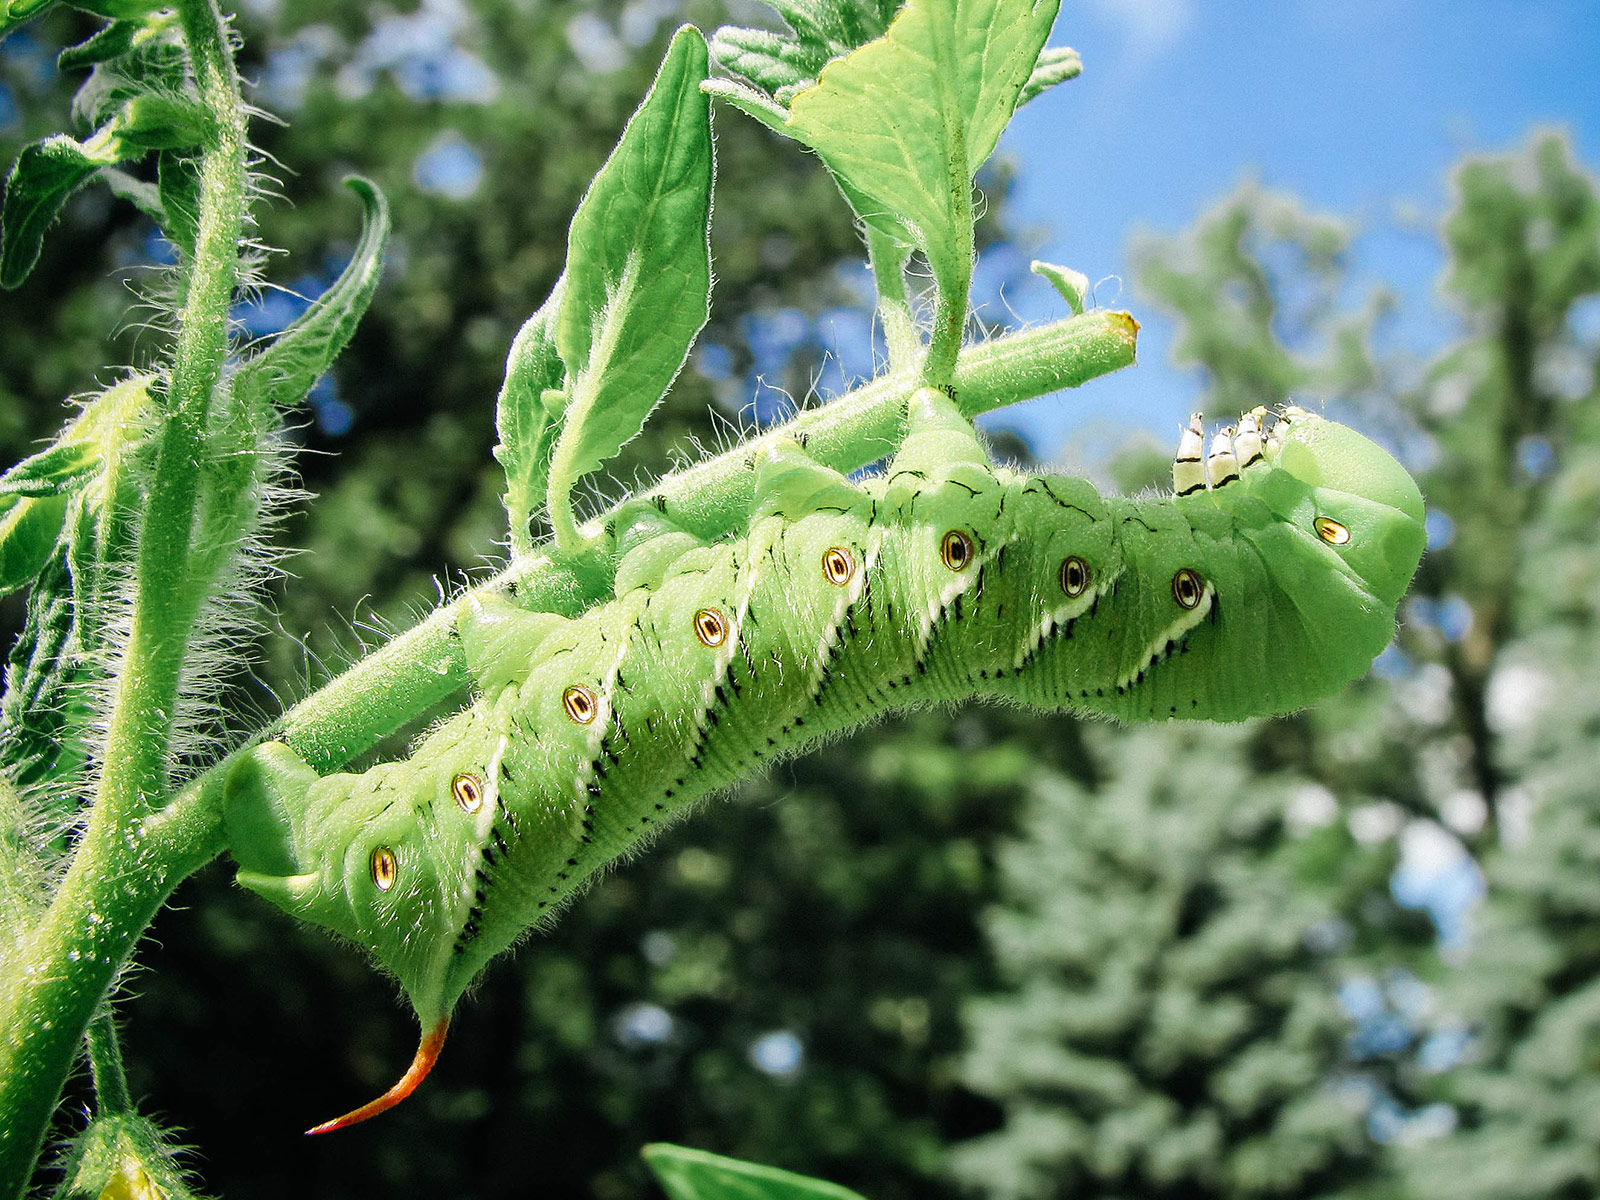 Visual guide to tobacco hornworm identification and other common types of green caterpillars in the garden